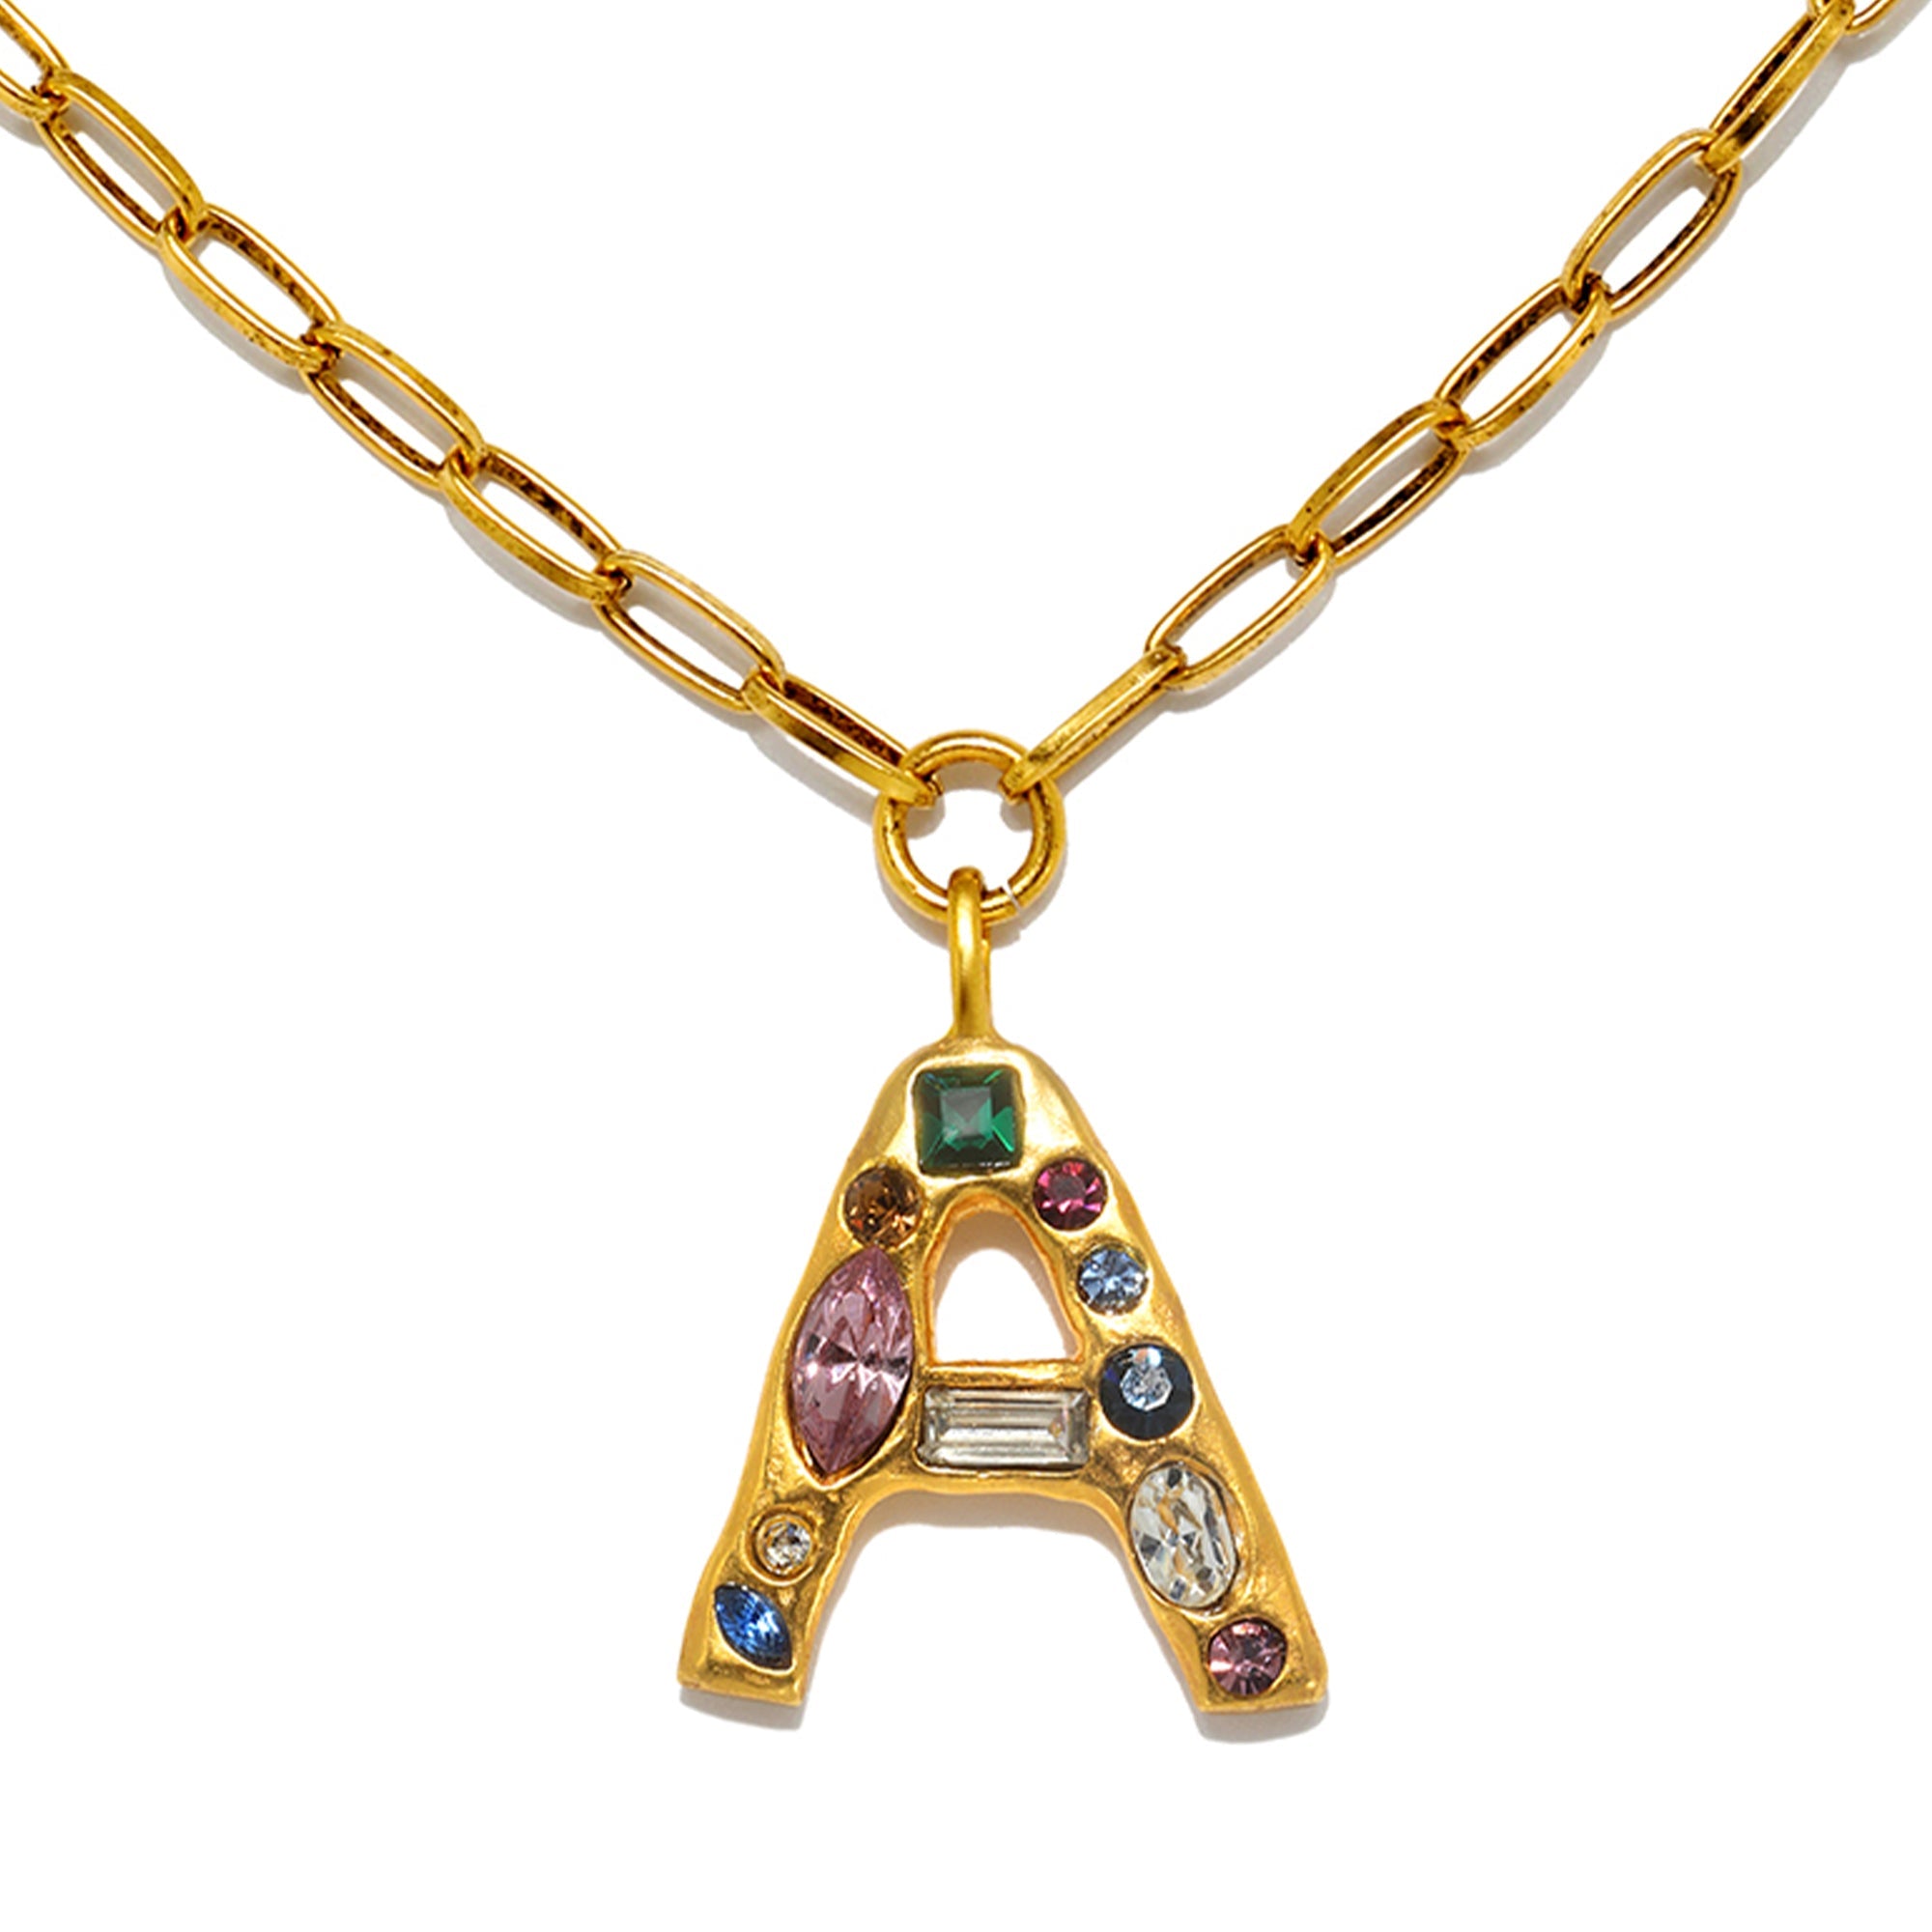 Build Your Own Initial Necklace 3 Charms